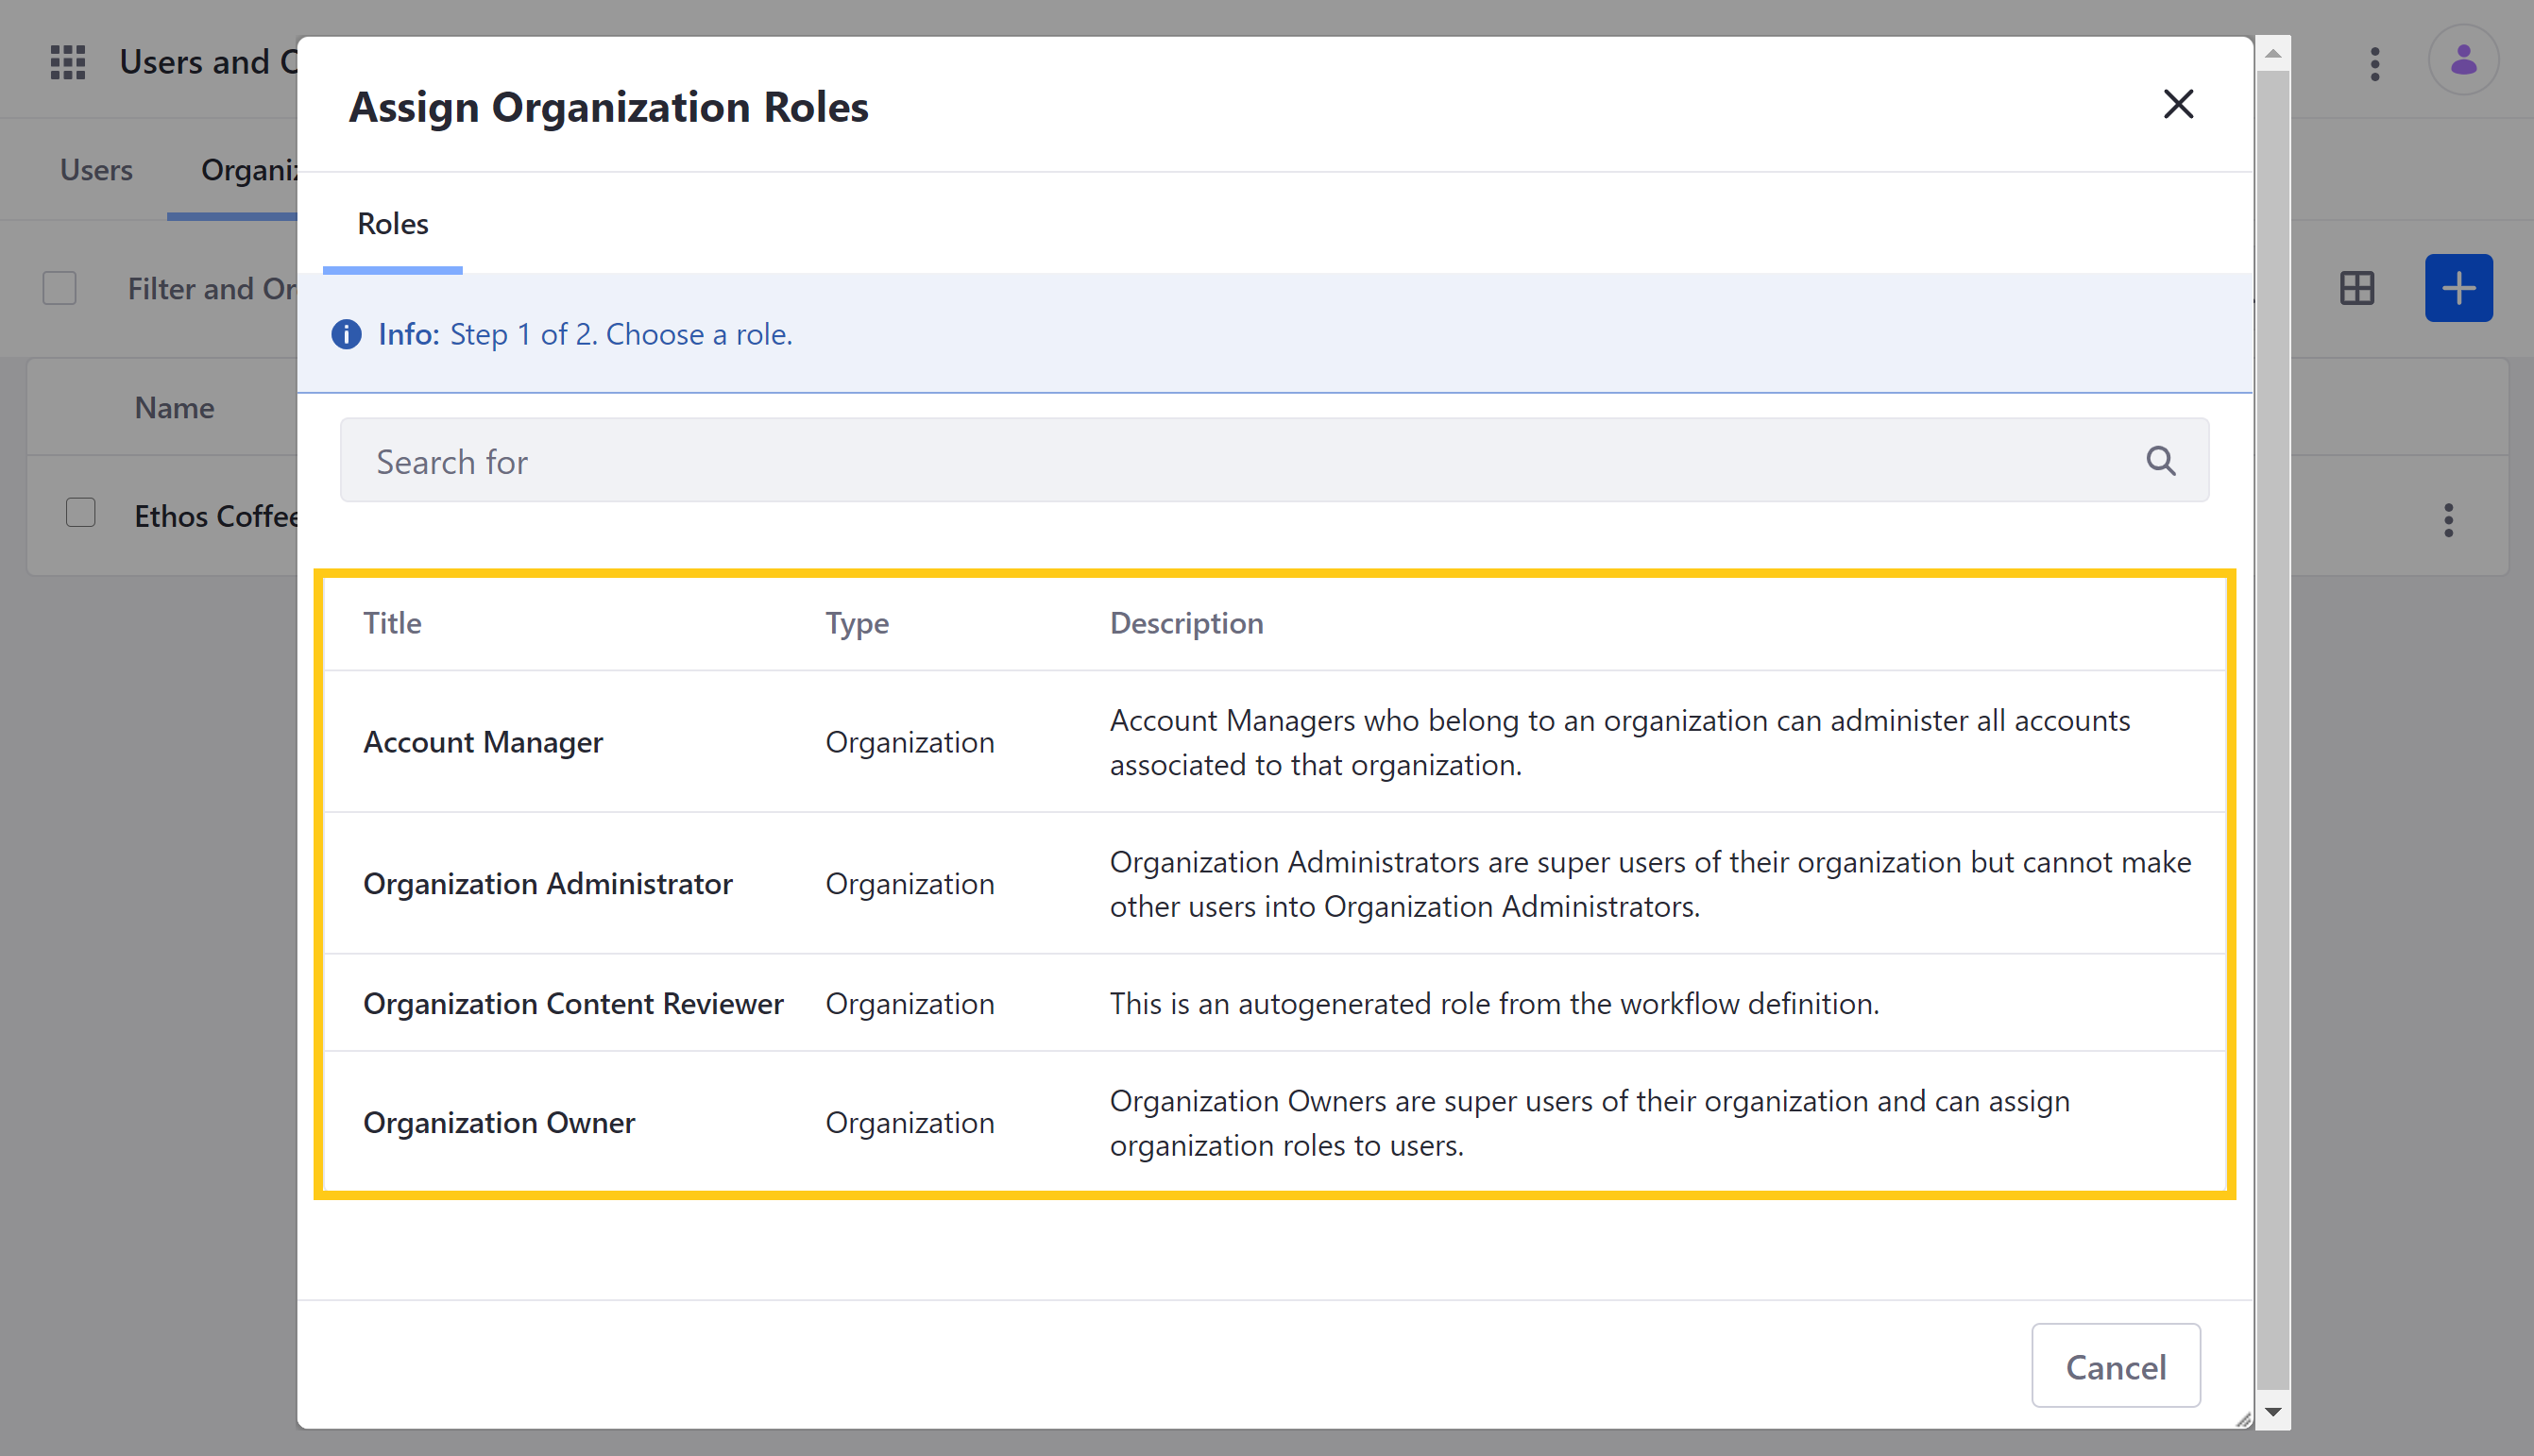 Click on the Organization role you want to assign to Users